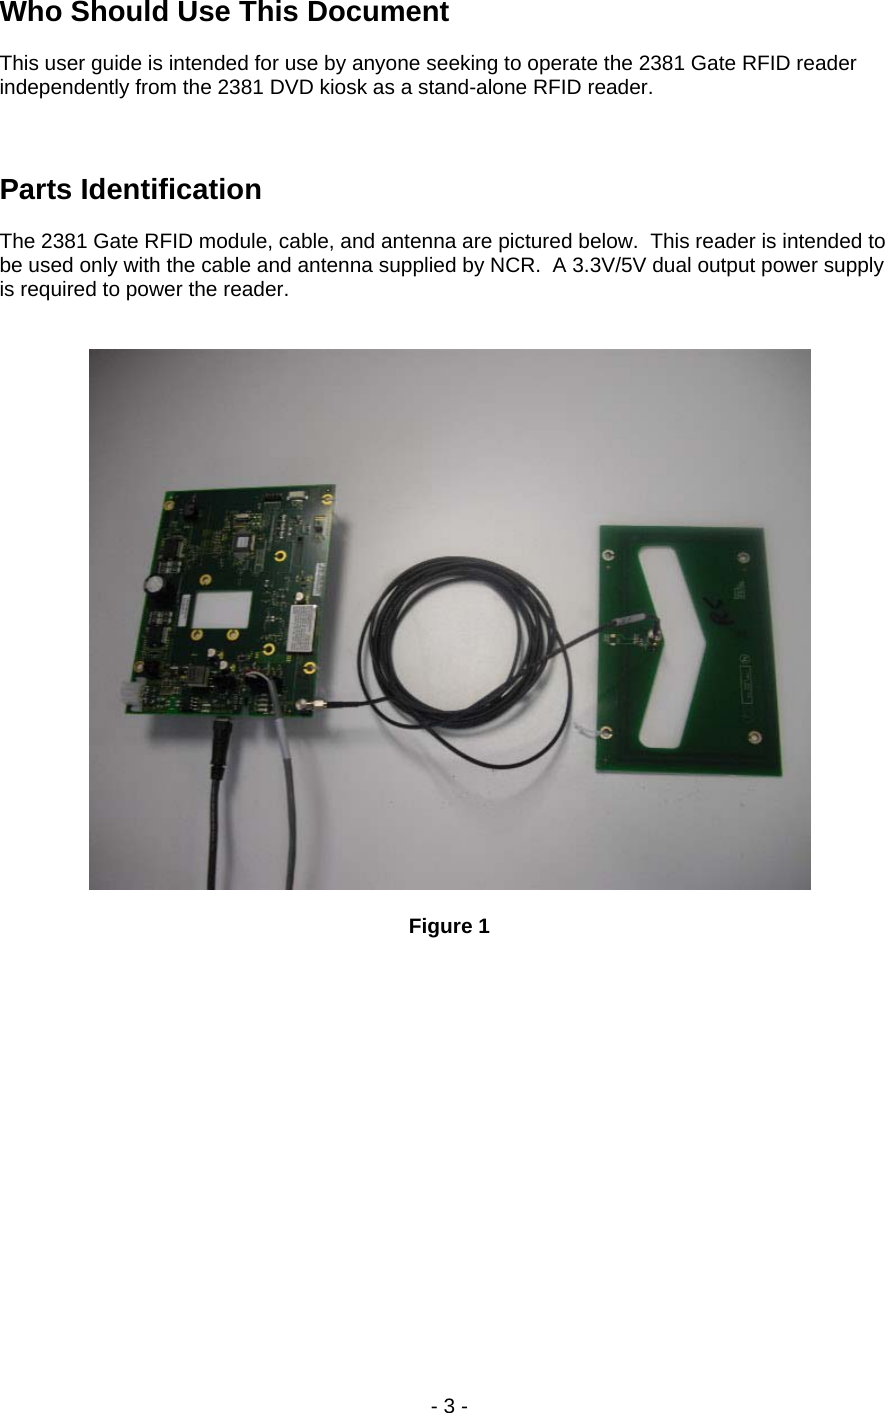 Who Should Use This Document  This user guide is intended for use by anyone seeking to operate the 2381 Gate RFID reader independently from the 2381 DVD kiosk as a stand-alone RFID reader.    Parts Identification  The 2381 Gate RFID module, cable, and antenna are pictured below.  This reader is intended to be used only with the cable and antenna supplied by NCR.  A 3.3V/5V dual output power supply is required to power the reader.     Figure 1  - 3 -